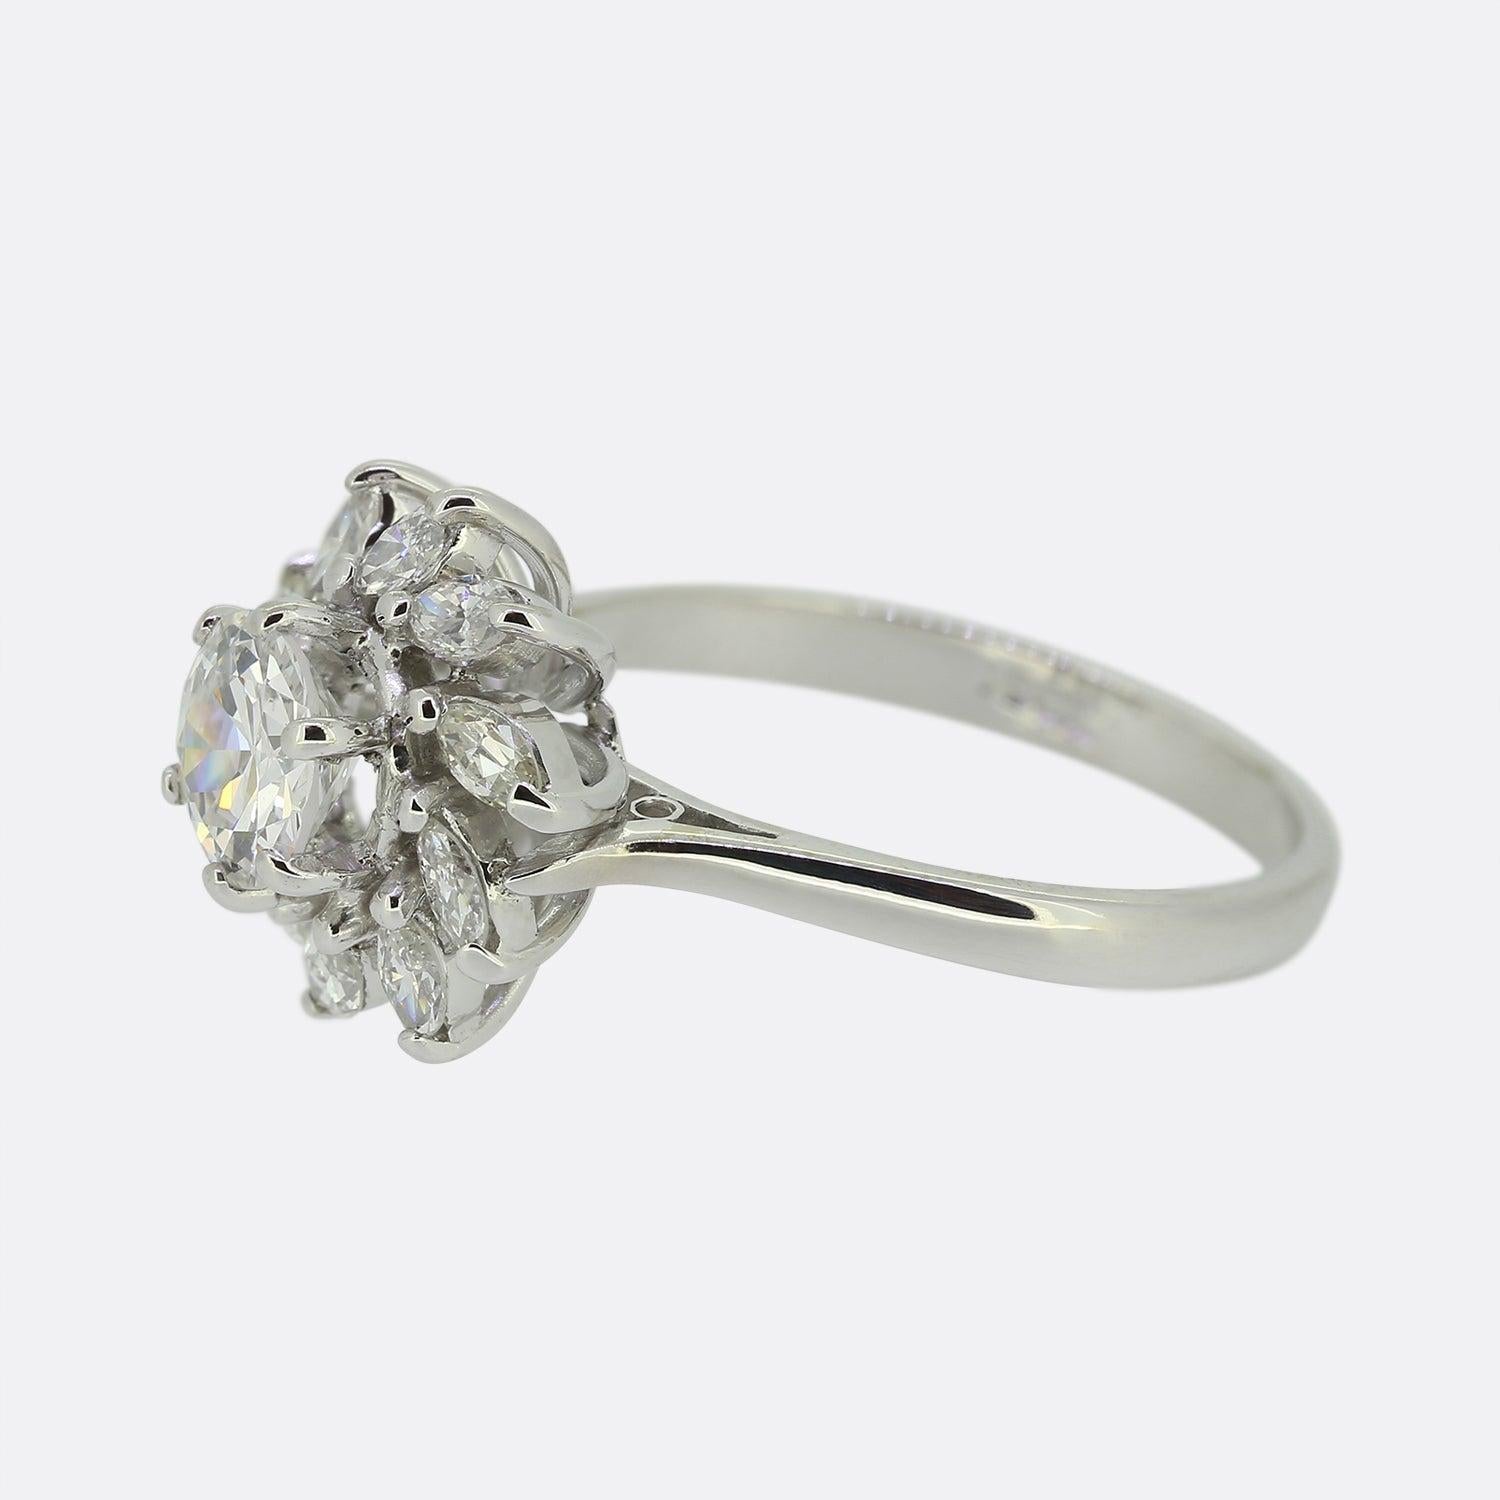 This is a lovely diamond cluster ring that dates back to the mid 20th century. The focal point of the ring is a 0.75 carat transitional cut diamond that is surrounded by a cluster of marquise cut diamonds. It is crafted in 18ct white gold and the